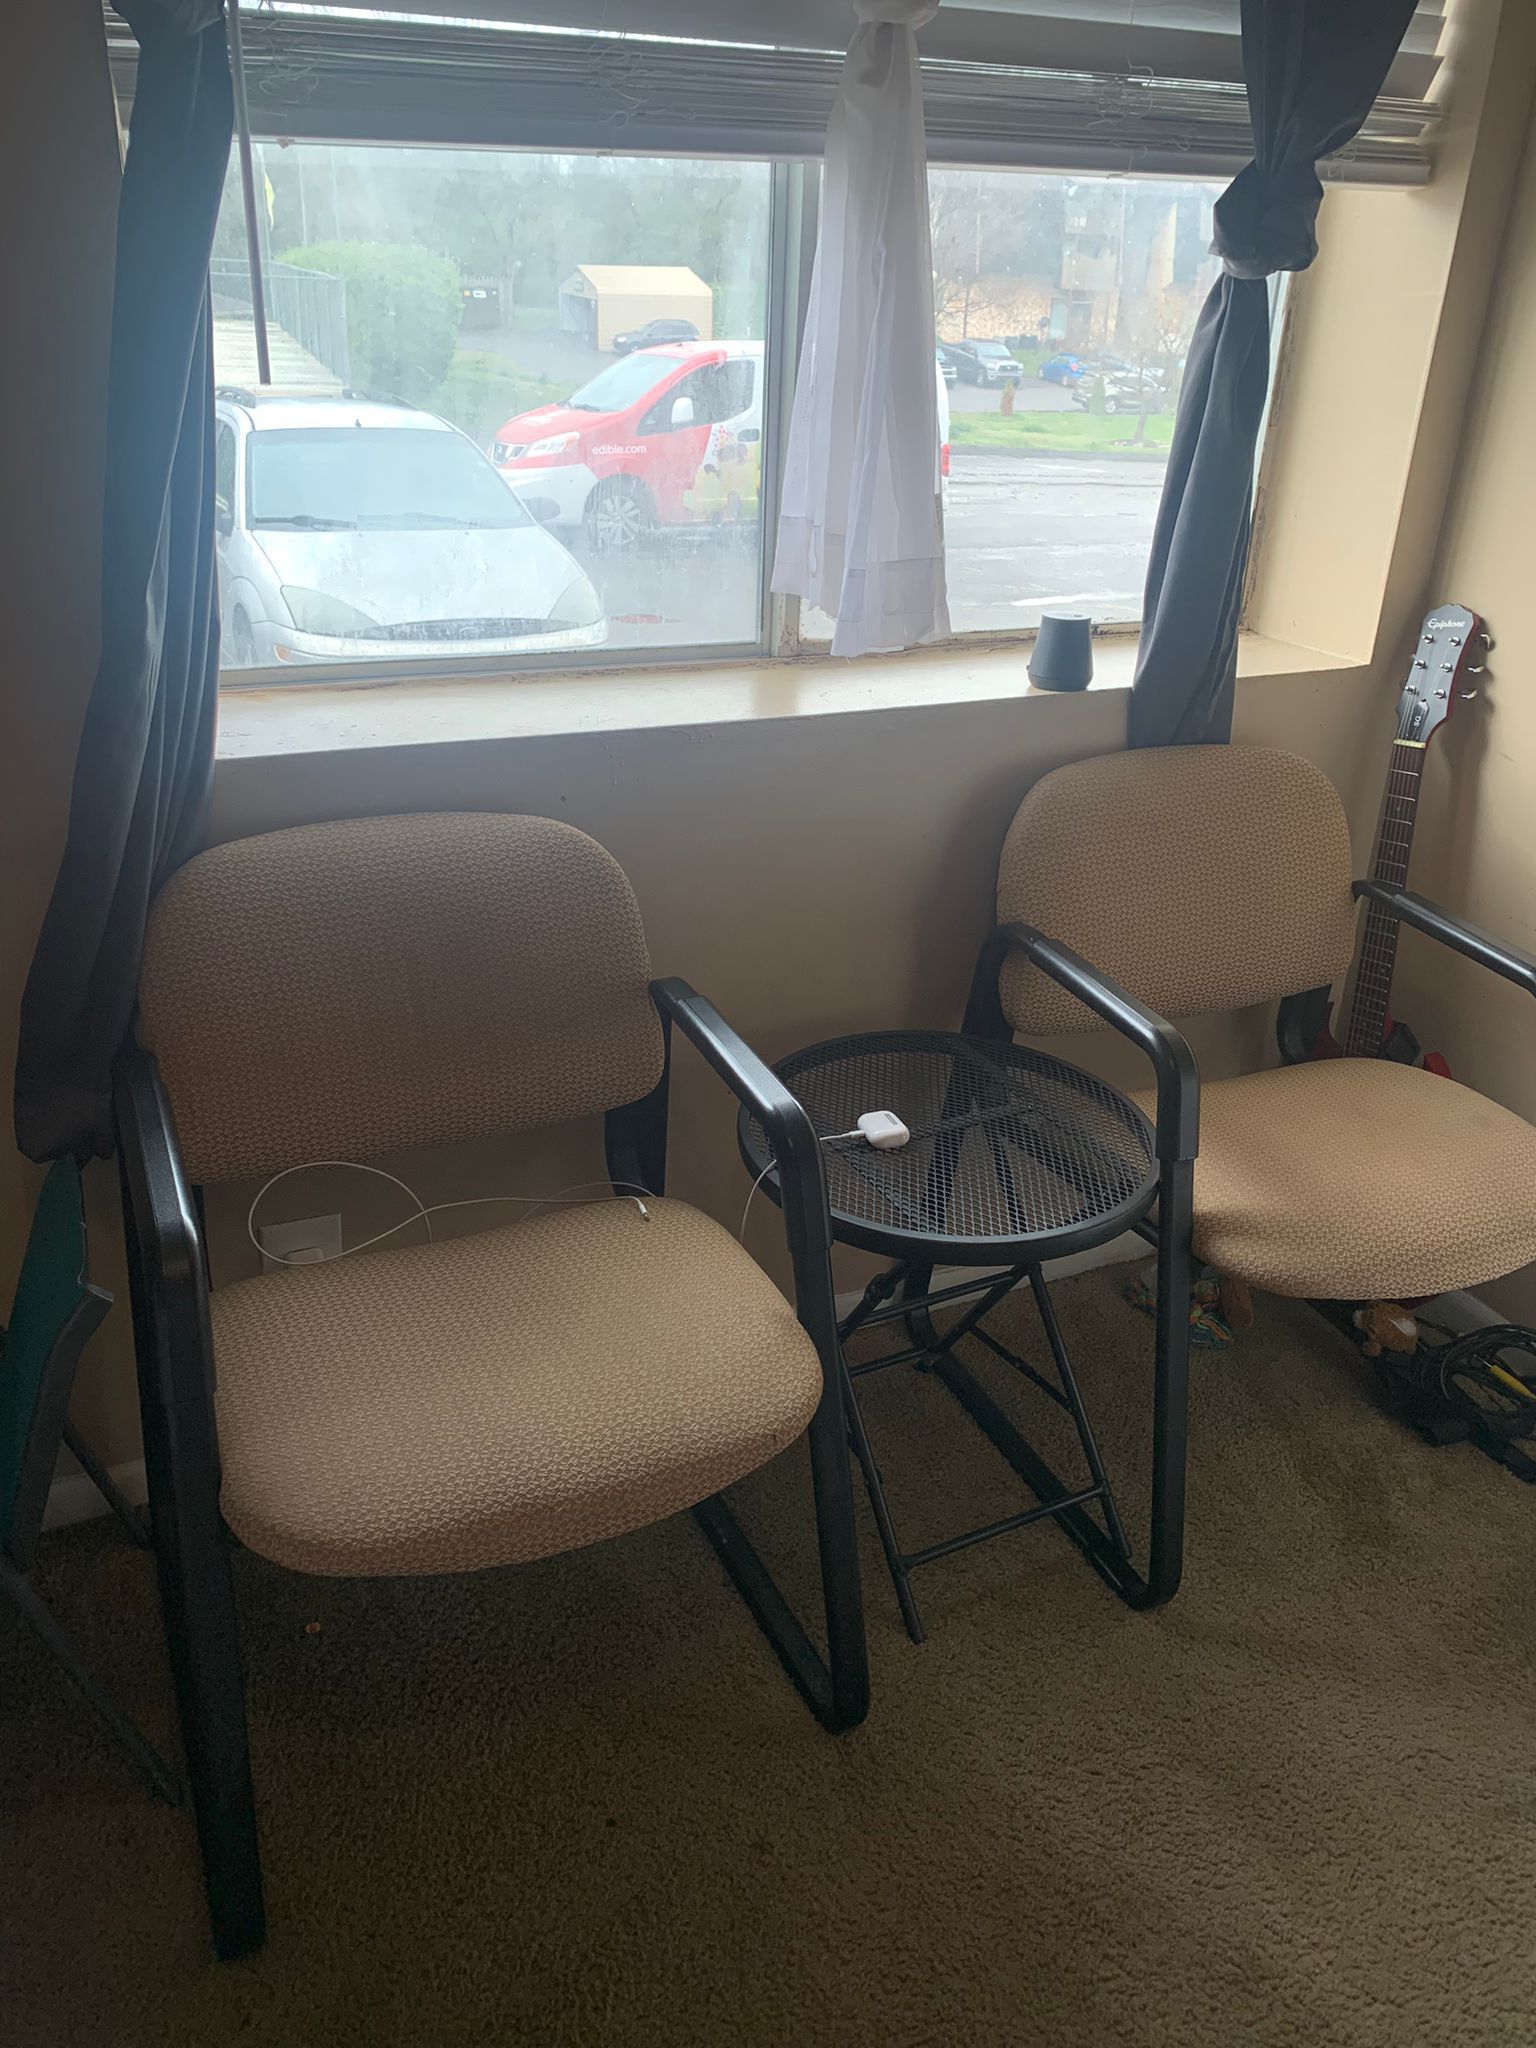 2 Coffee Color Office Chairs & 1 Metal Stool/table